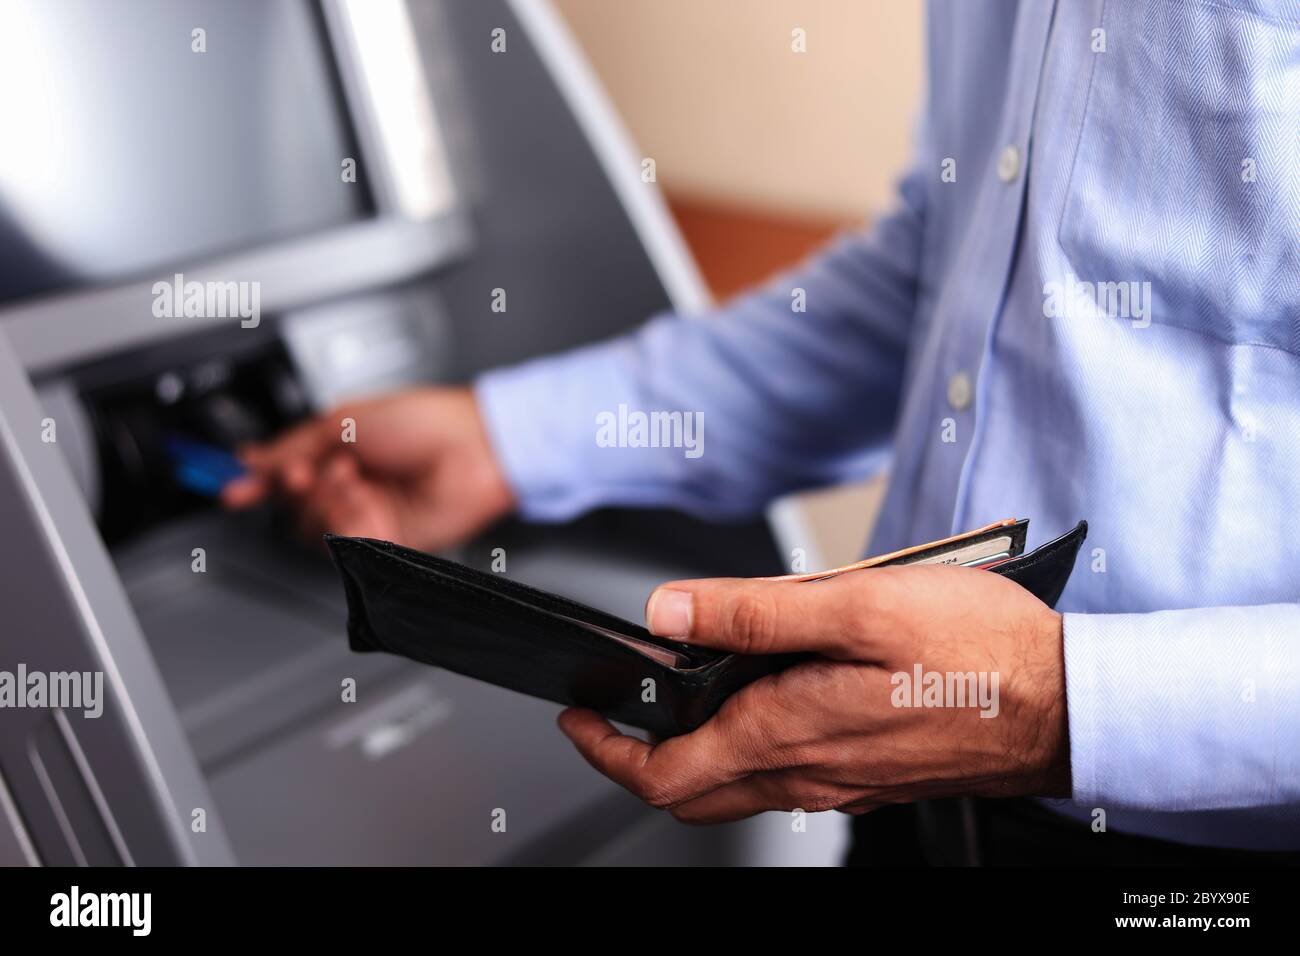 Man with an open black wallet at ATM Machine, inserting a credit card. ATM Transaction. Close Up. Soft Focus. POS Terminal. Stock Photo